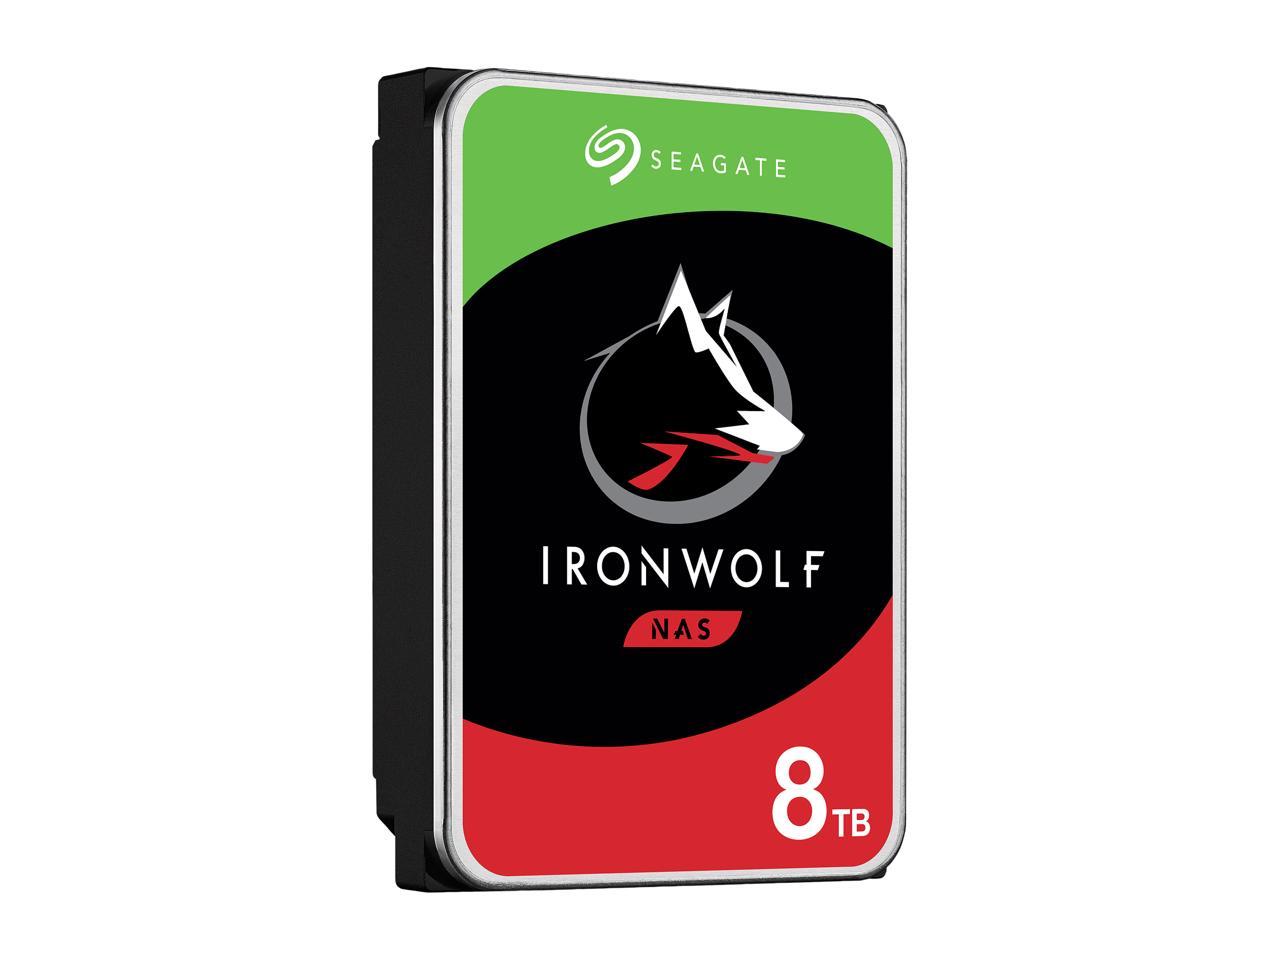 Seagate IronWolf 8TB NAS Hard Drive 7200 RPM 256MB Cache SATA 6.0Gb/s CMR 3.5" Internal HDD for RAID Network Attached Storage ST8000VN004